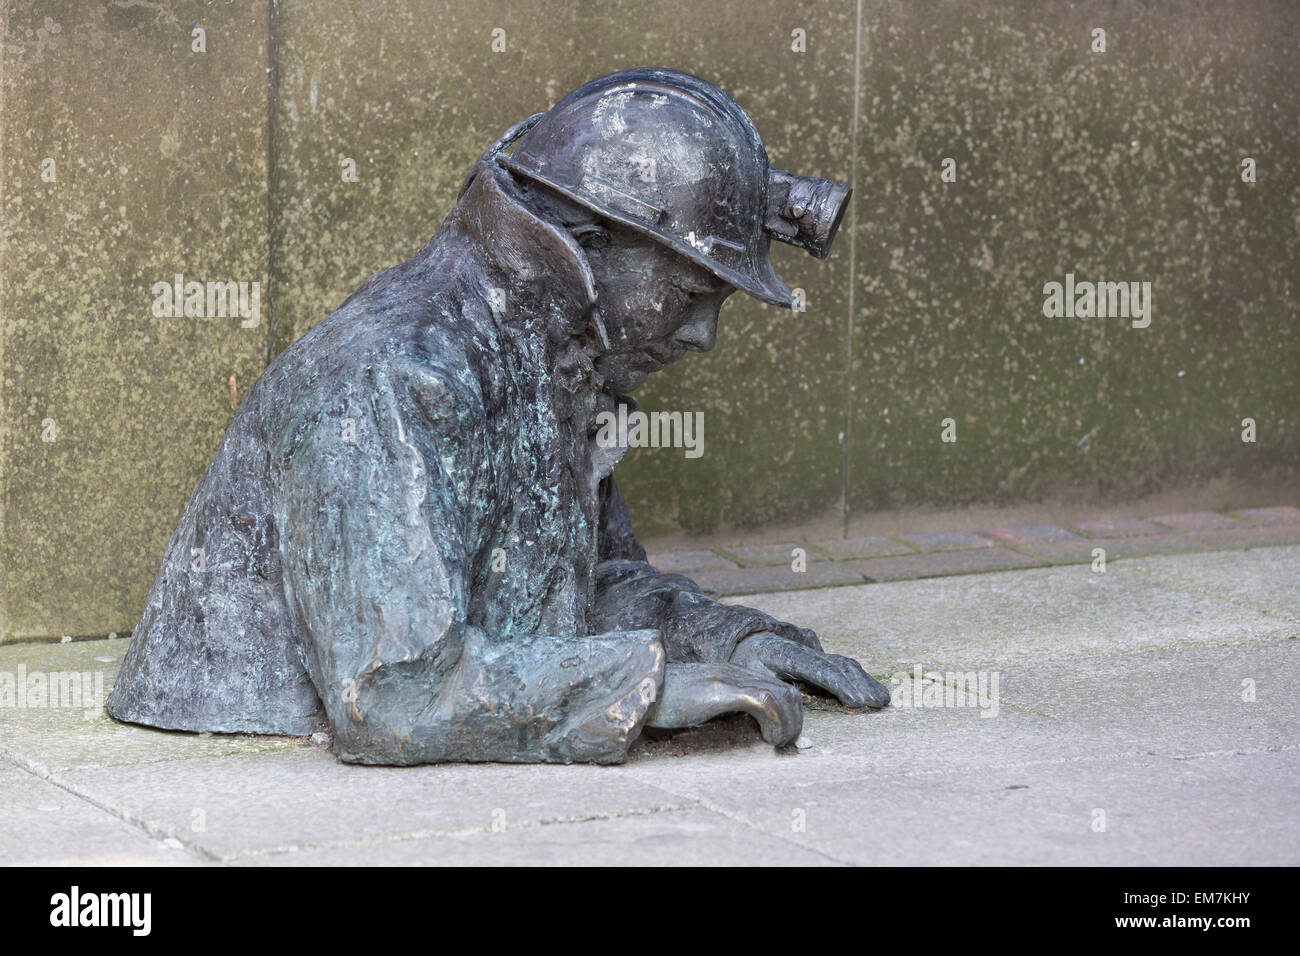 Bronze street sculpture of a miner emerging from the ground, Ashton-under-Lyne, Lancashire Stock Photo